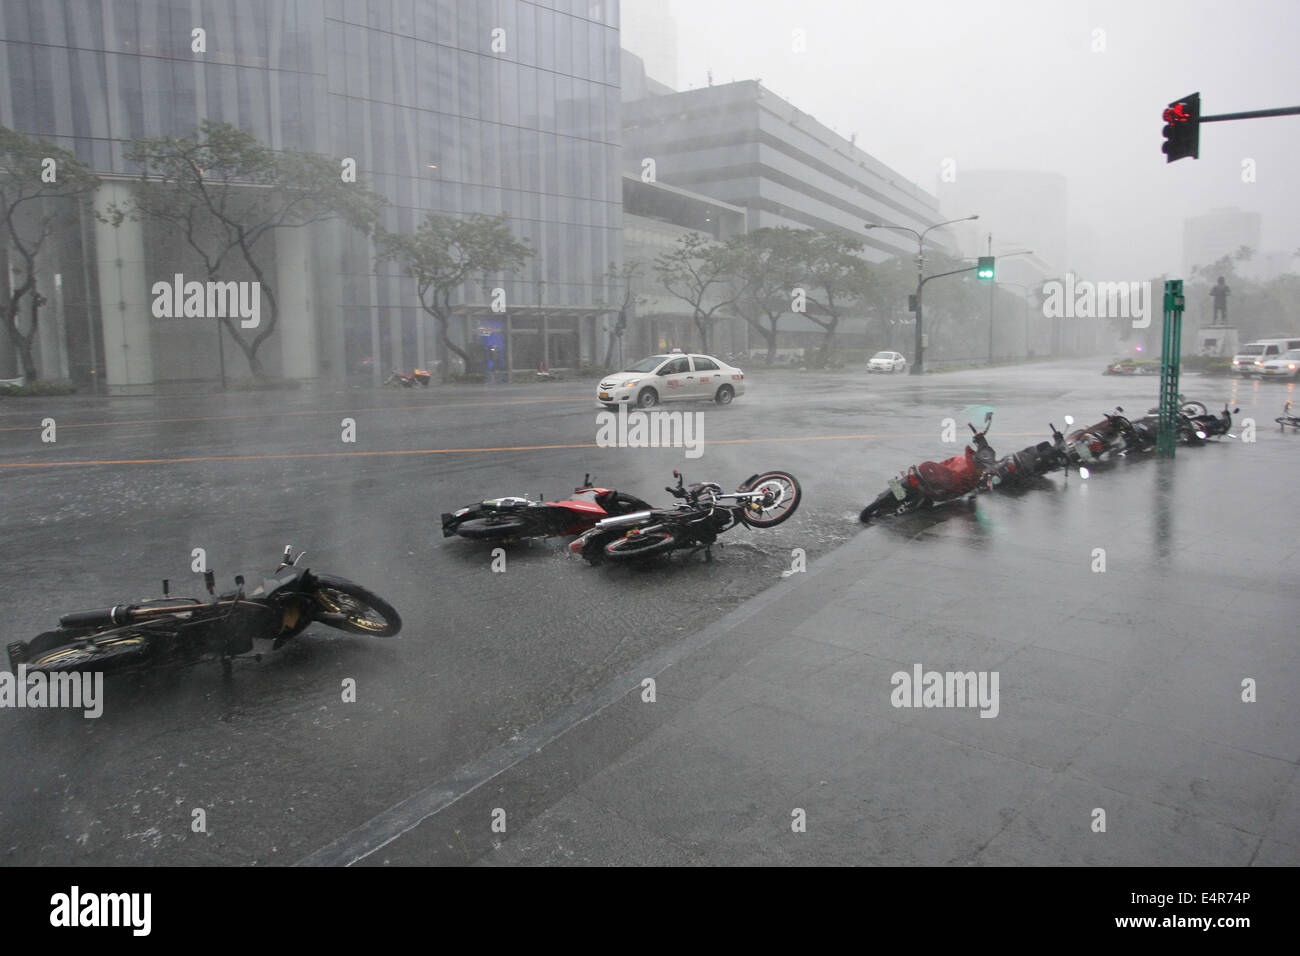 Manila, Philippines. 16th July, 2014. Motorcycles lie on the road toppled by strong winds as Typhoon Rammasun hit Metro Manila. Typhoon Rammasun (locally known as Glenda) had maximum sustained winds of 150 kph and gustiness of up to 185 kph when it hit Metro Manila. Across the country, about 400,000 people had fled their homes and sheltered in evacuation centers, according to the disaster management council. © PACIFIC PRESS/Alamy Live News Stock Photo